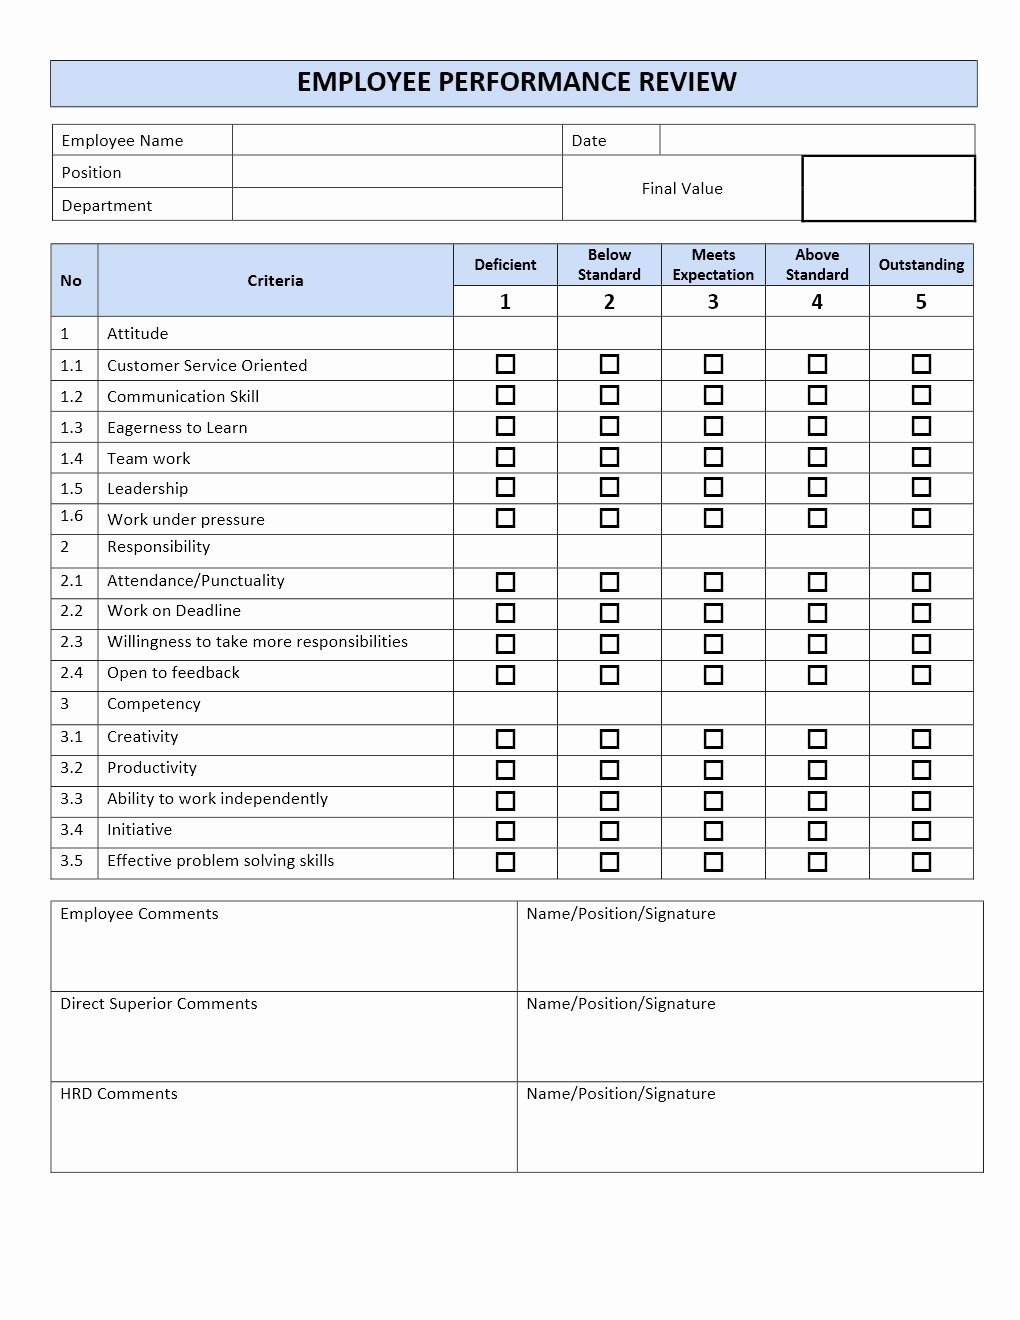 Employee Review form Template Awesome Employee Performance Review form